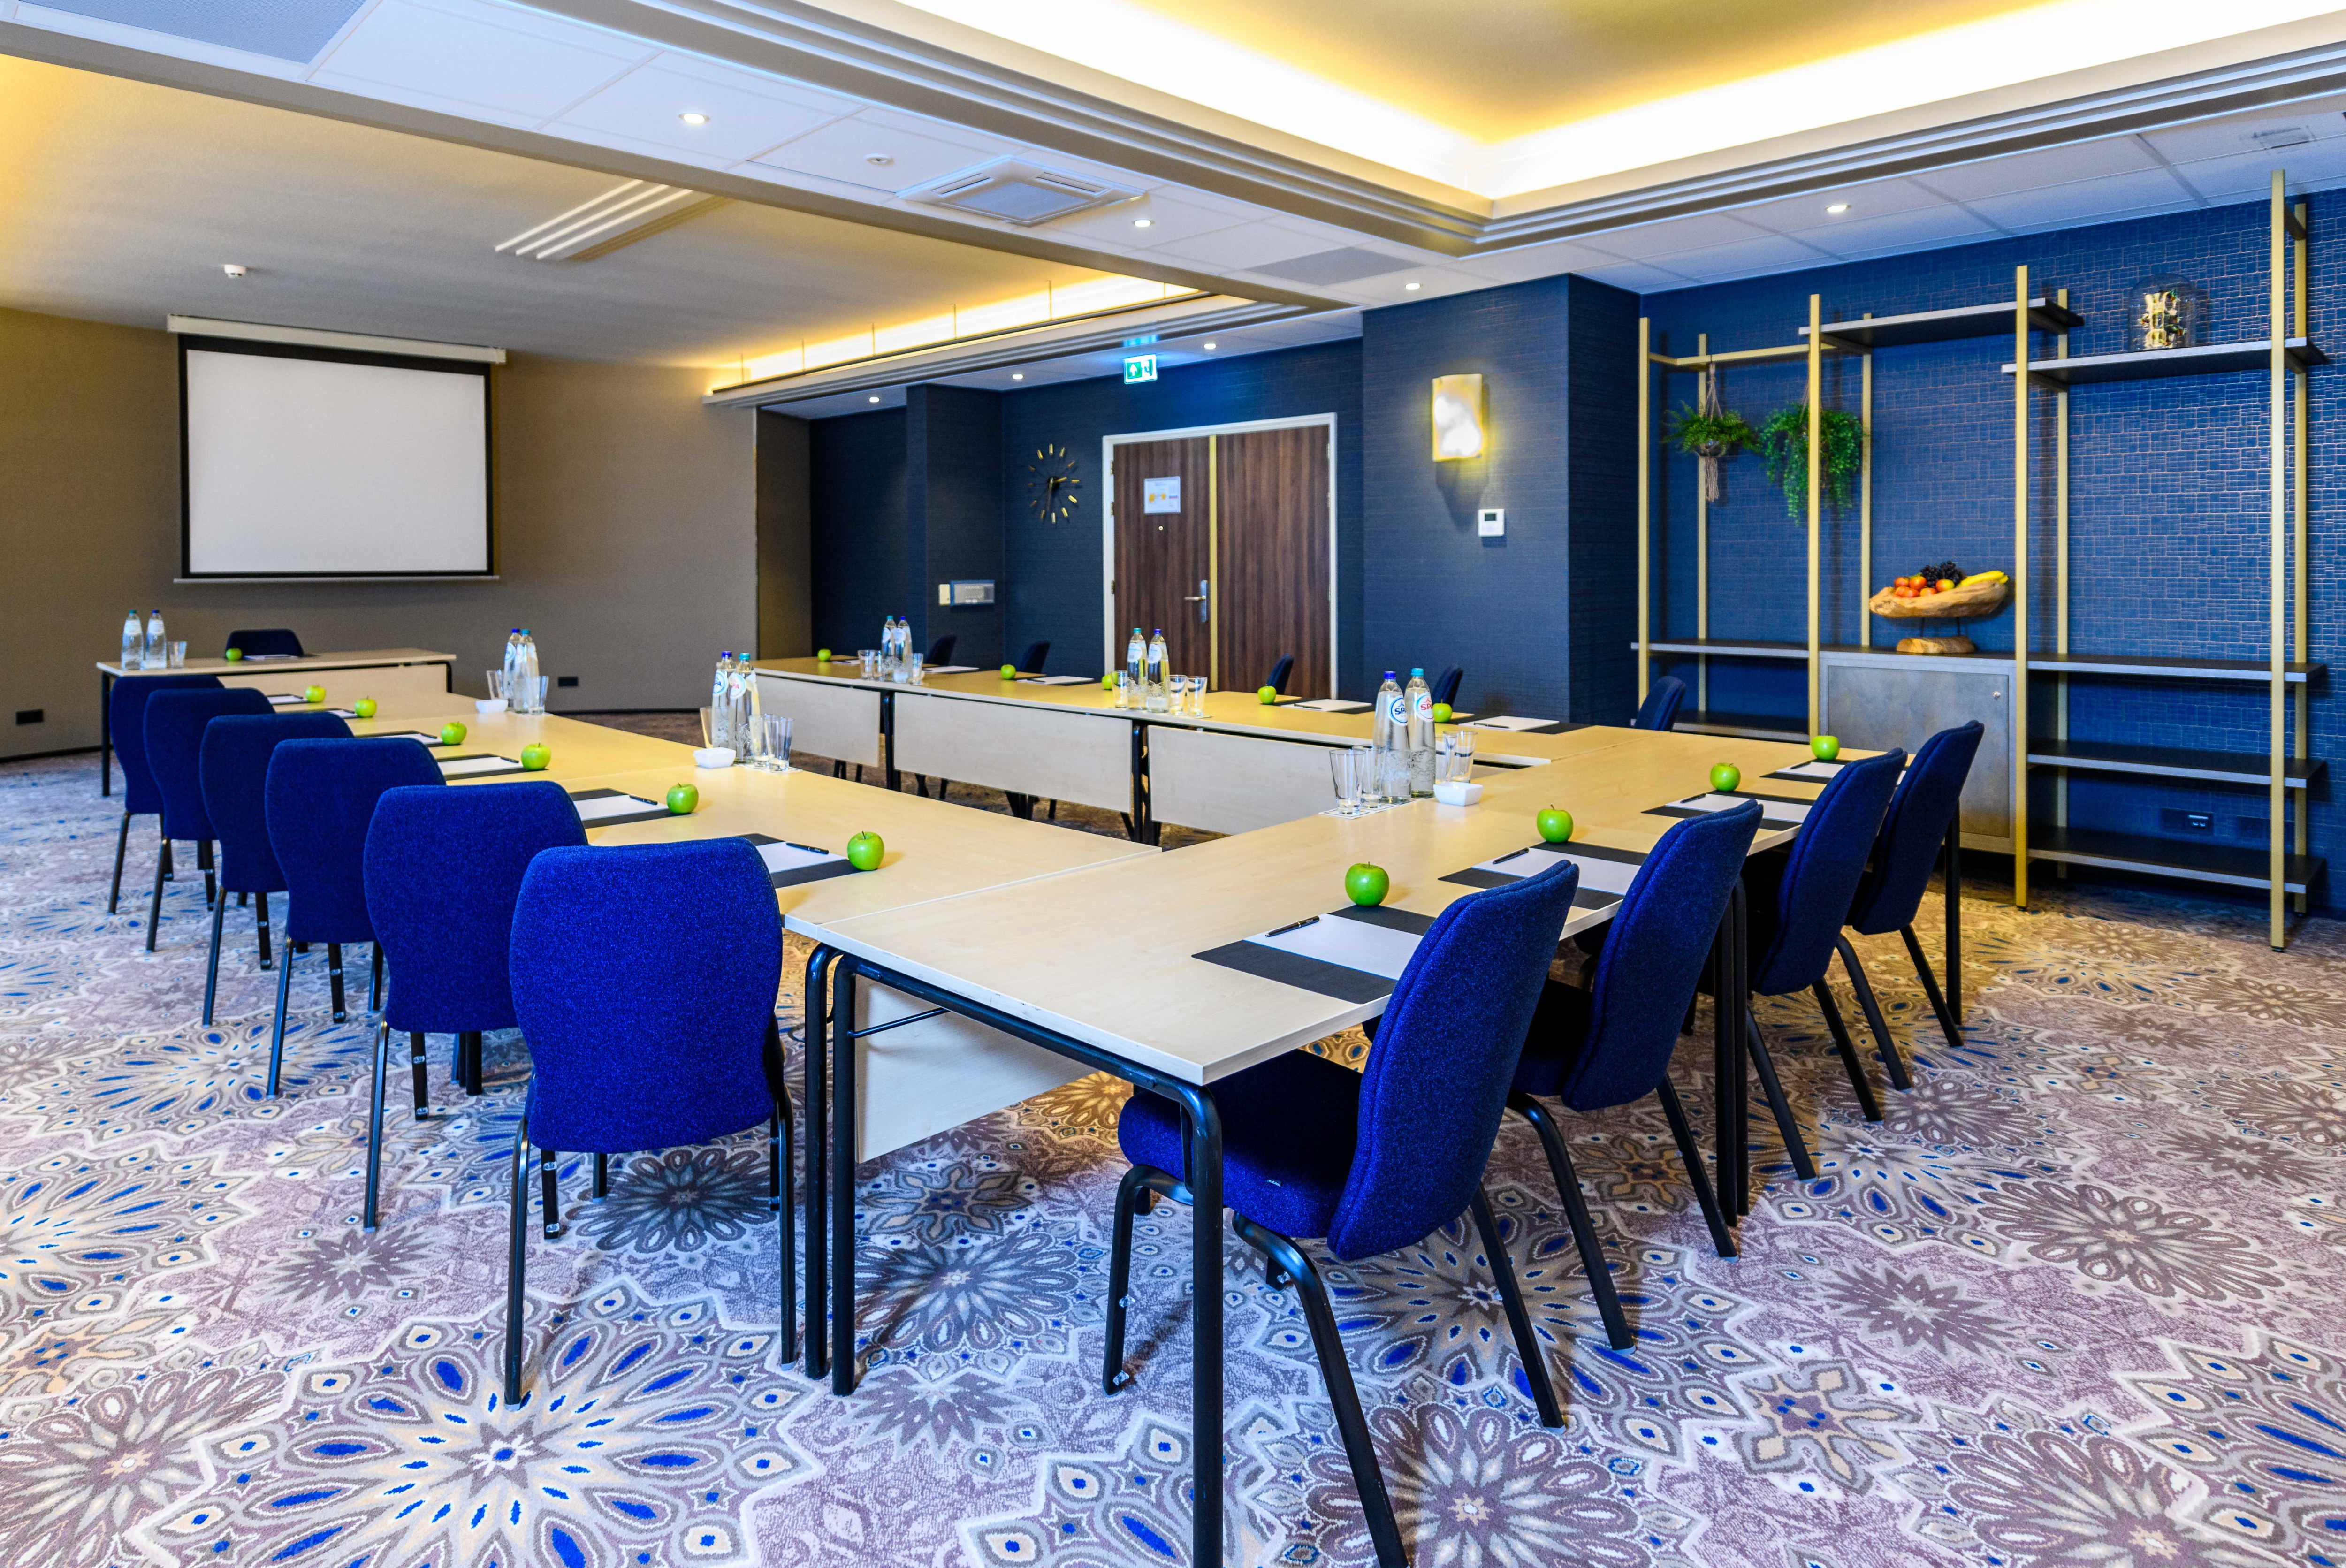 Meeting Room with Projection Screen Setup U Style